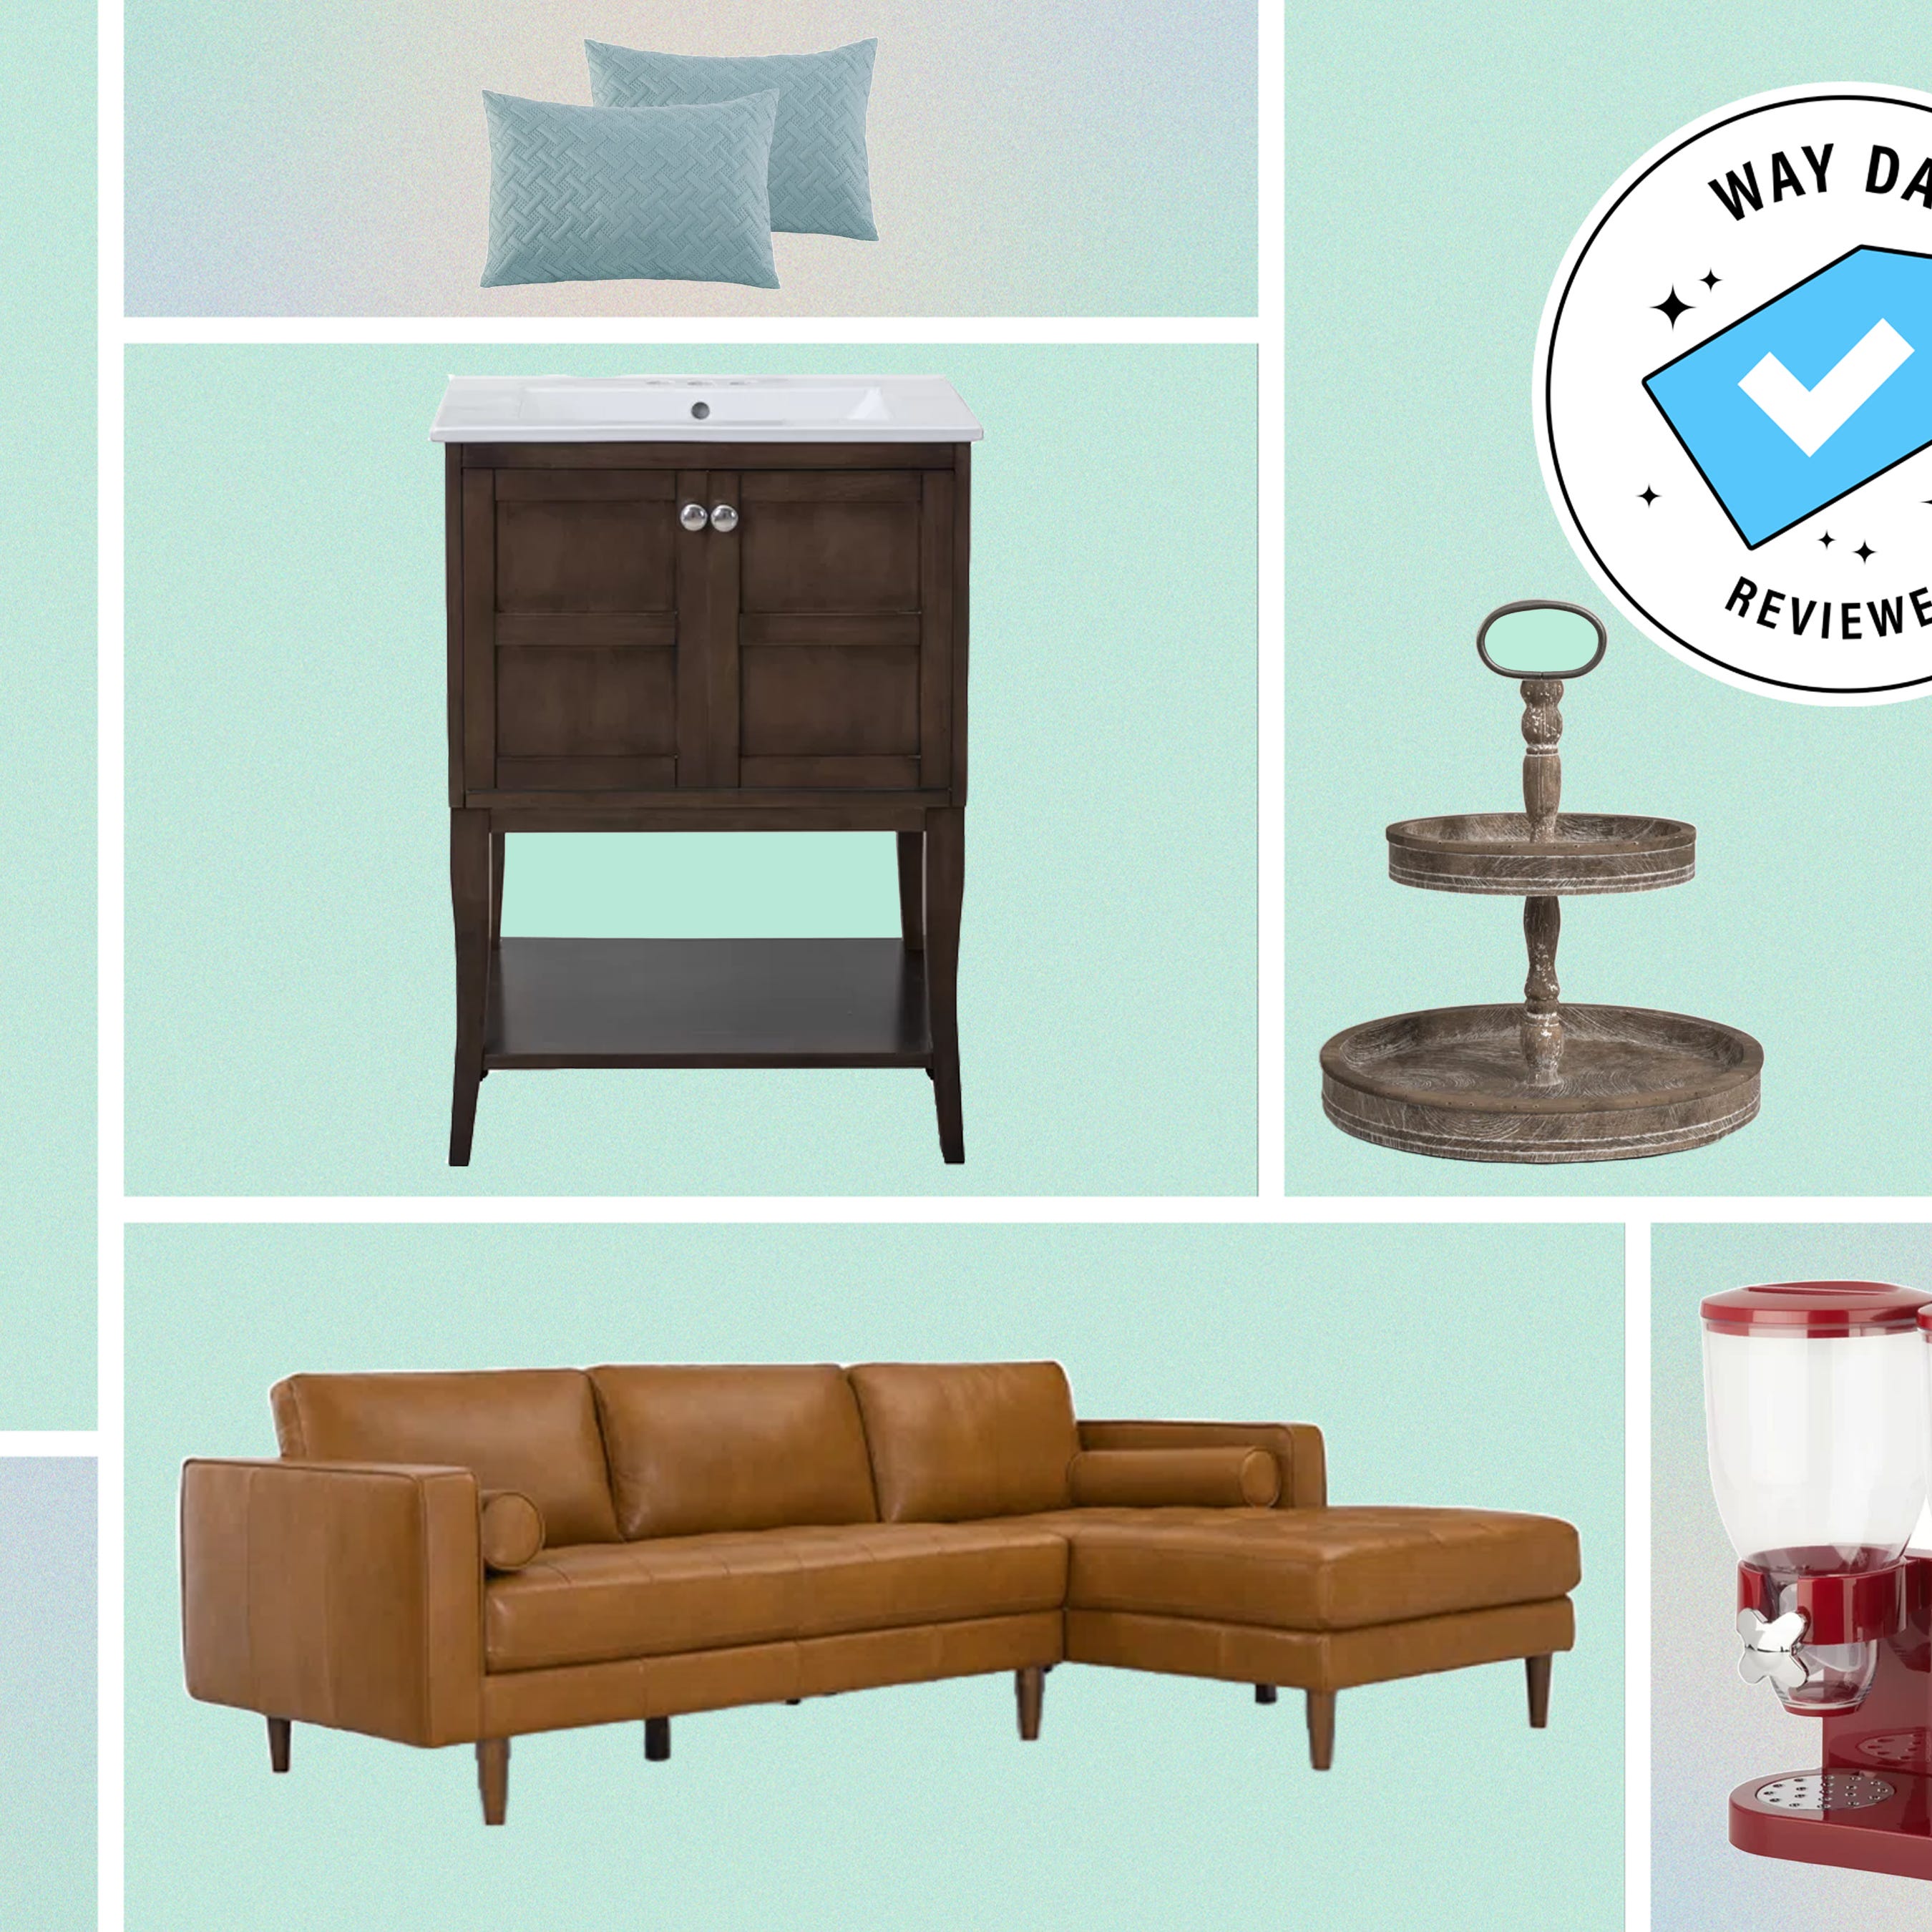 Shop for amazing home essentials at Wayfair's Way Day 2023 sale.